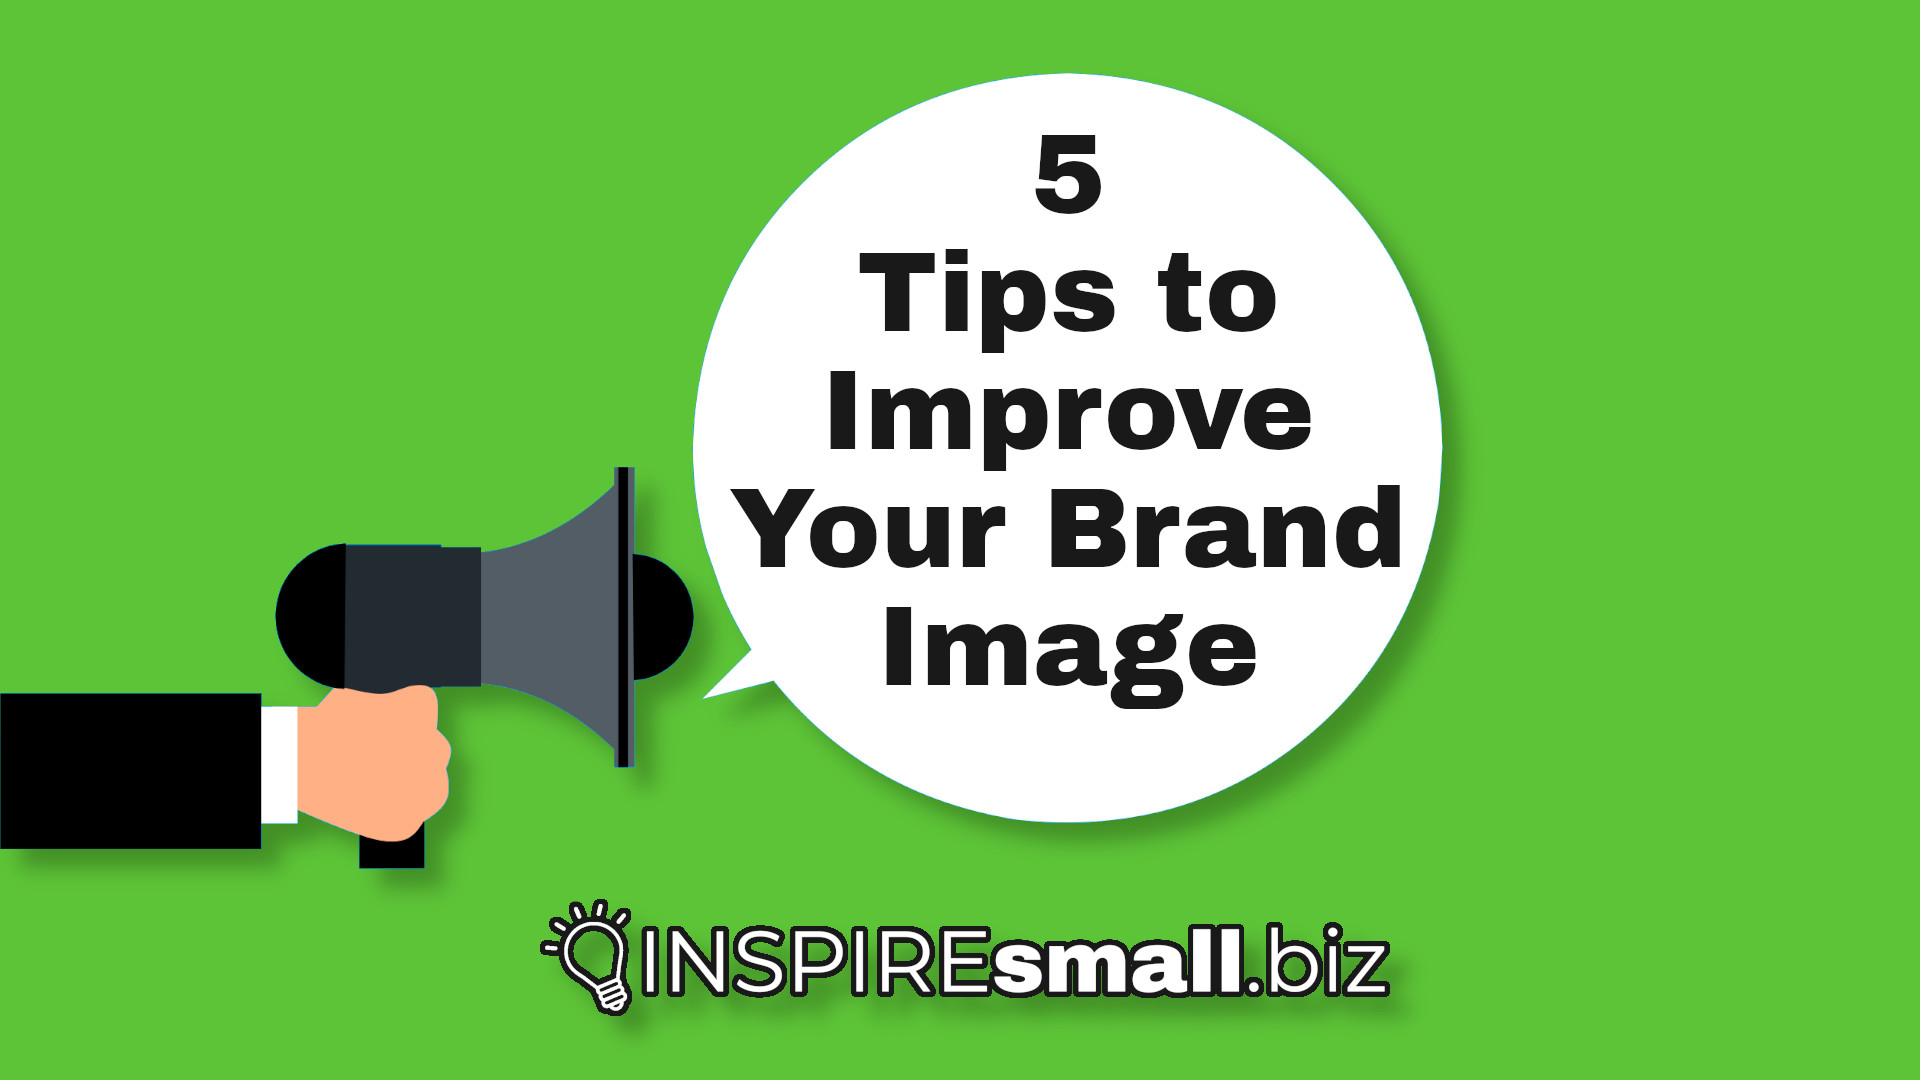 5 Tips to Improve Your Brand Image